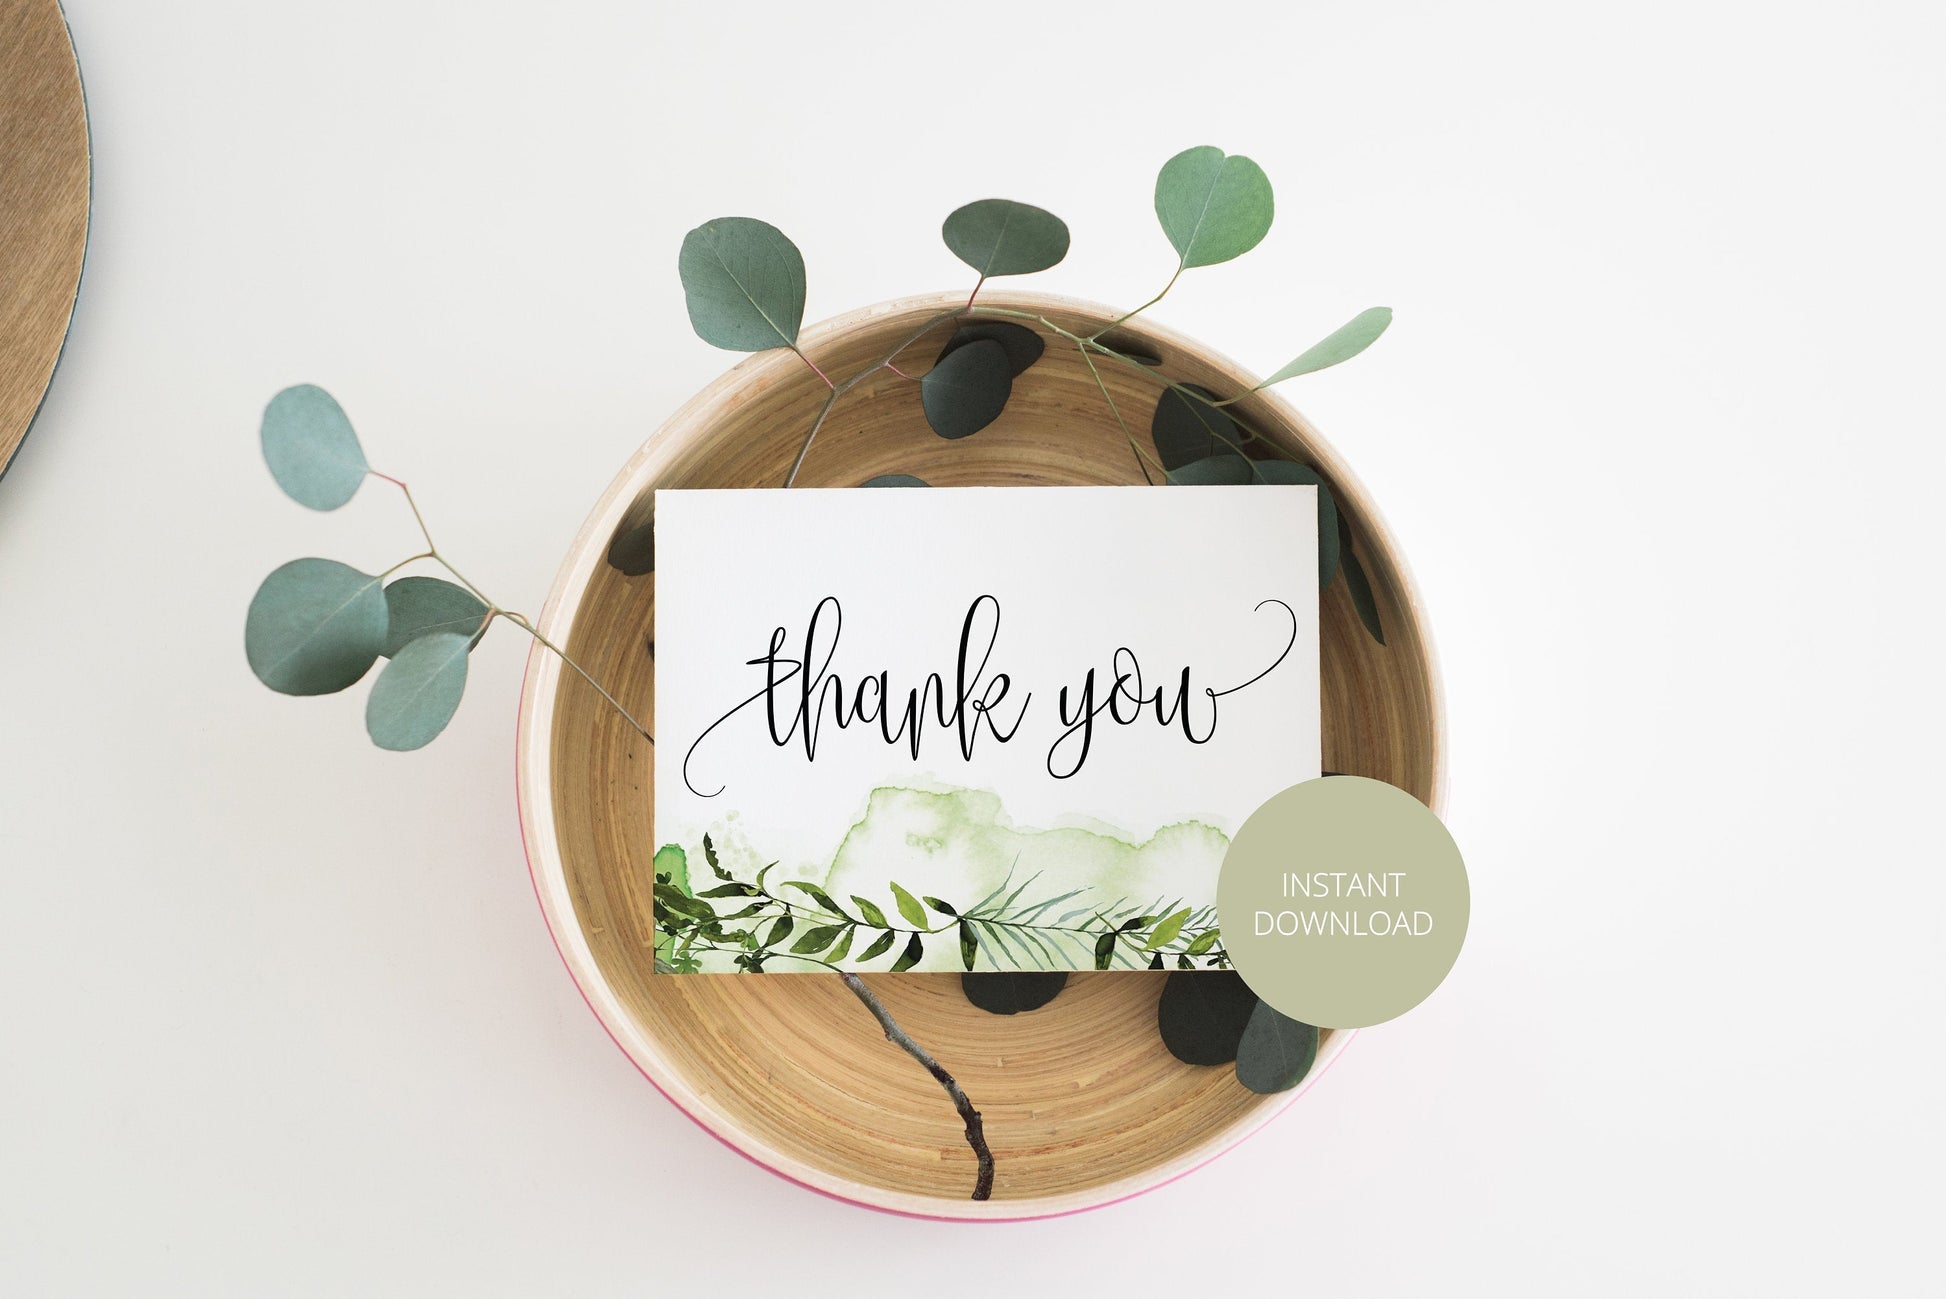 Simple Wedding Thank You Card, Instant Download, Thank you Cards, Printable Thank You, Wedding Cards, Greenery, Rustic - Melissa TAGS | TY | INSERTS SAVVY PAPER CO